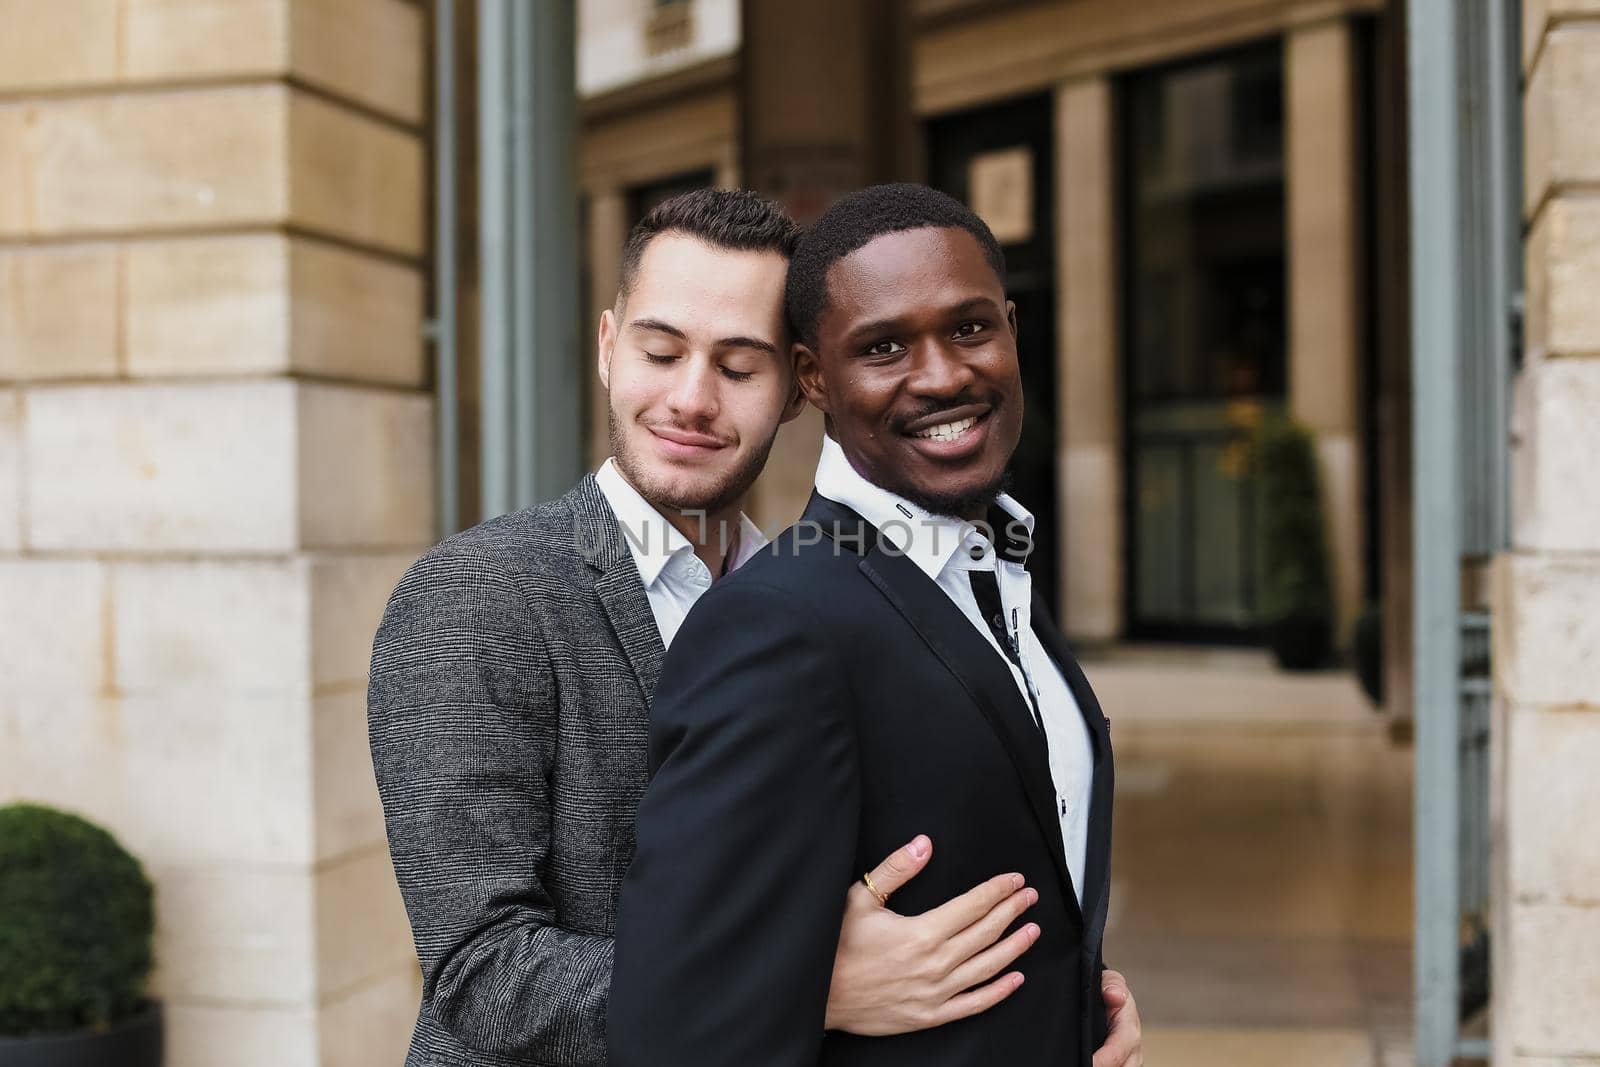 Caucasian man hugging afro american guy outside and wearing suit. Concept of happy same sex couple and lgbt gays.